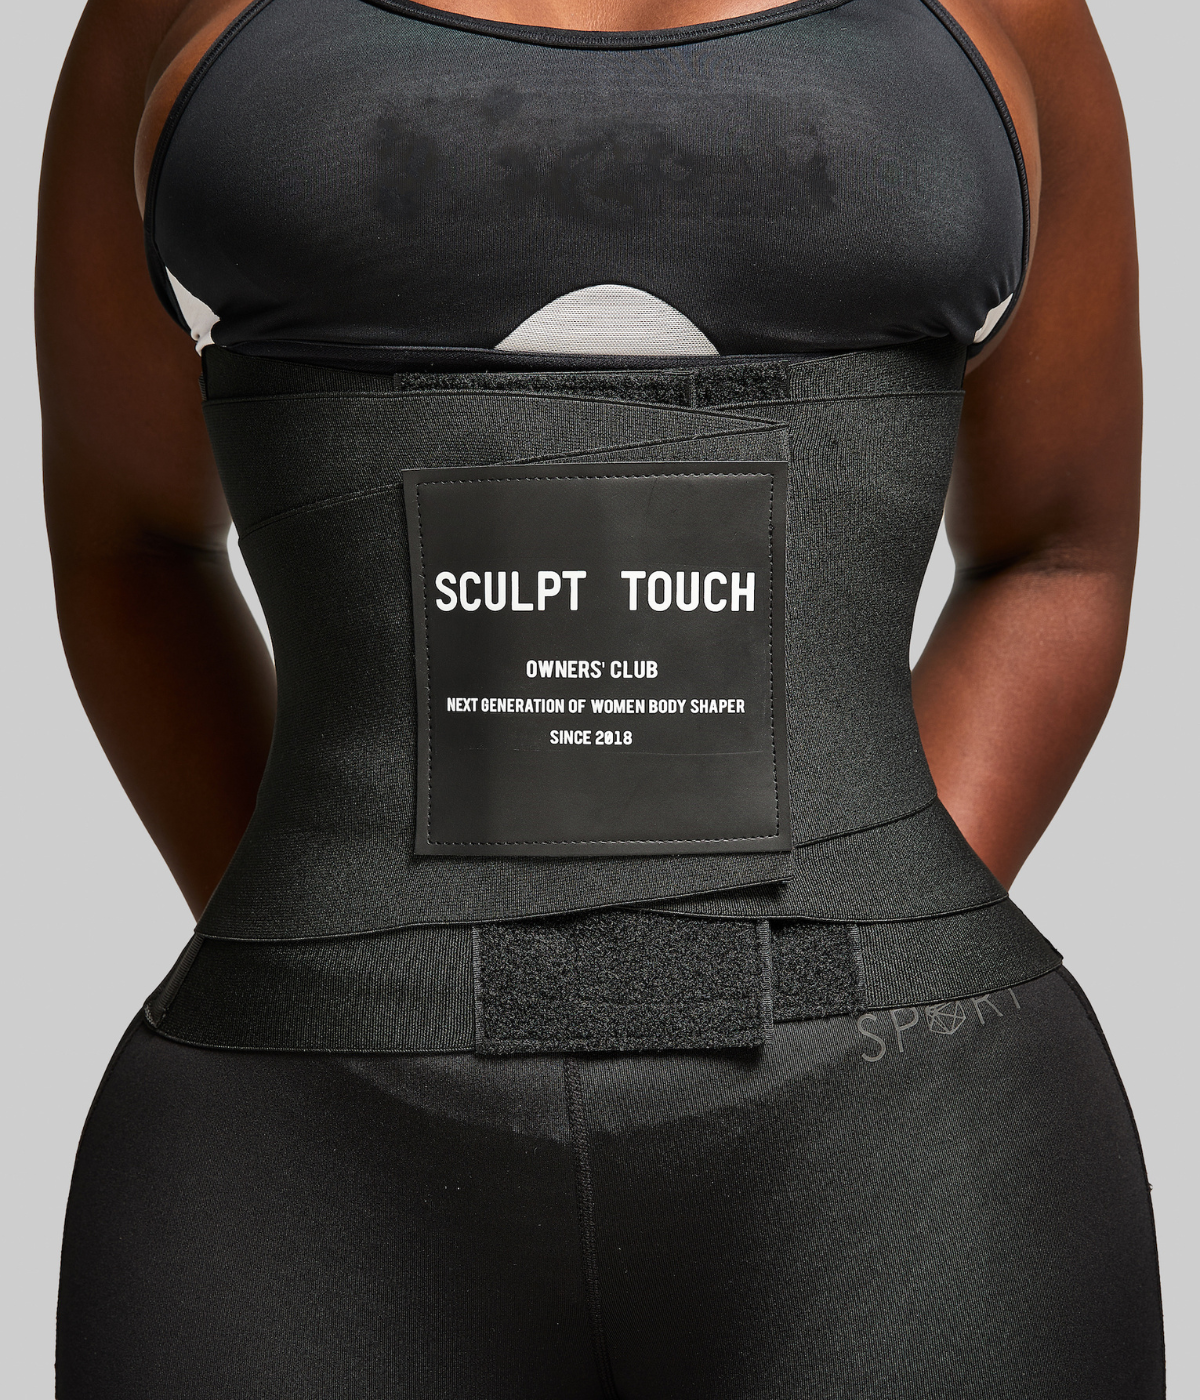 SculptTouch are changing the way you rock your curves! Buy now